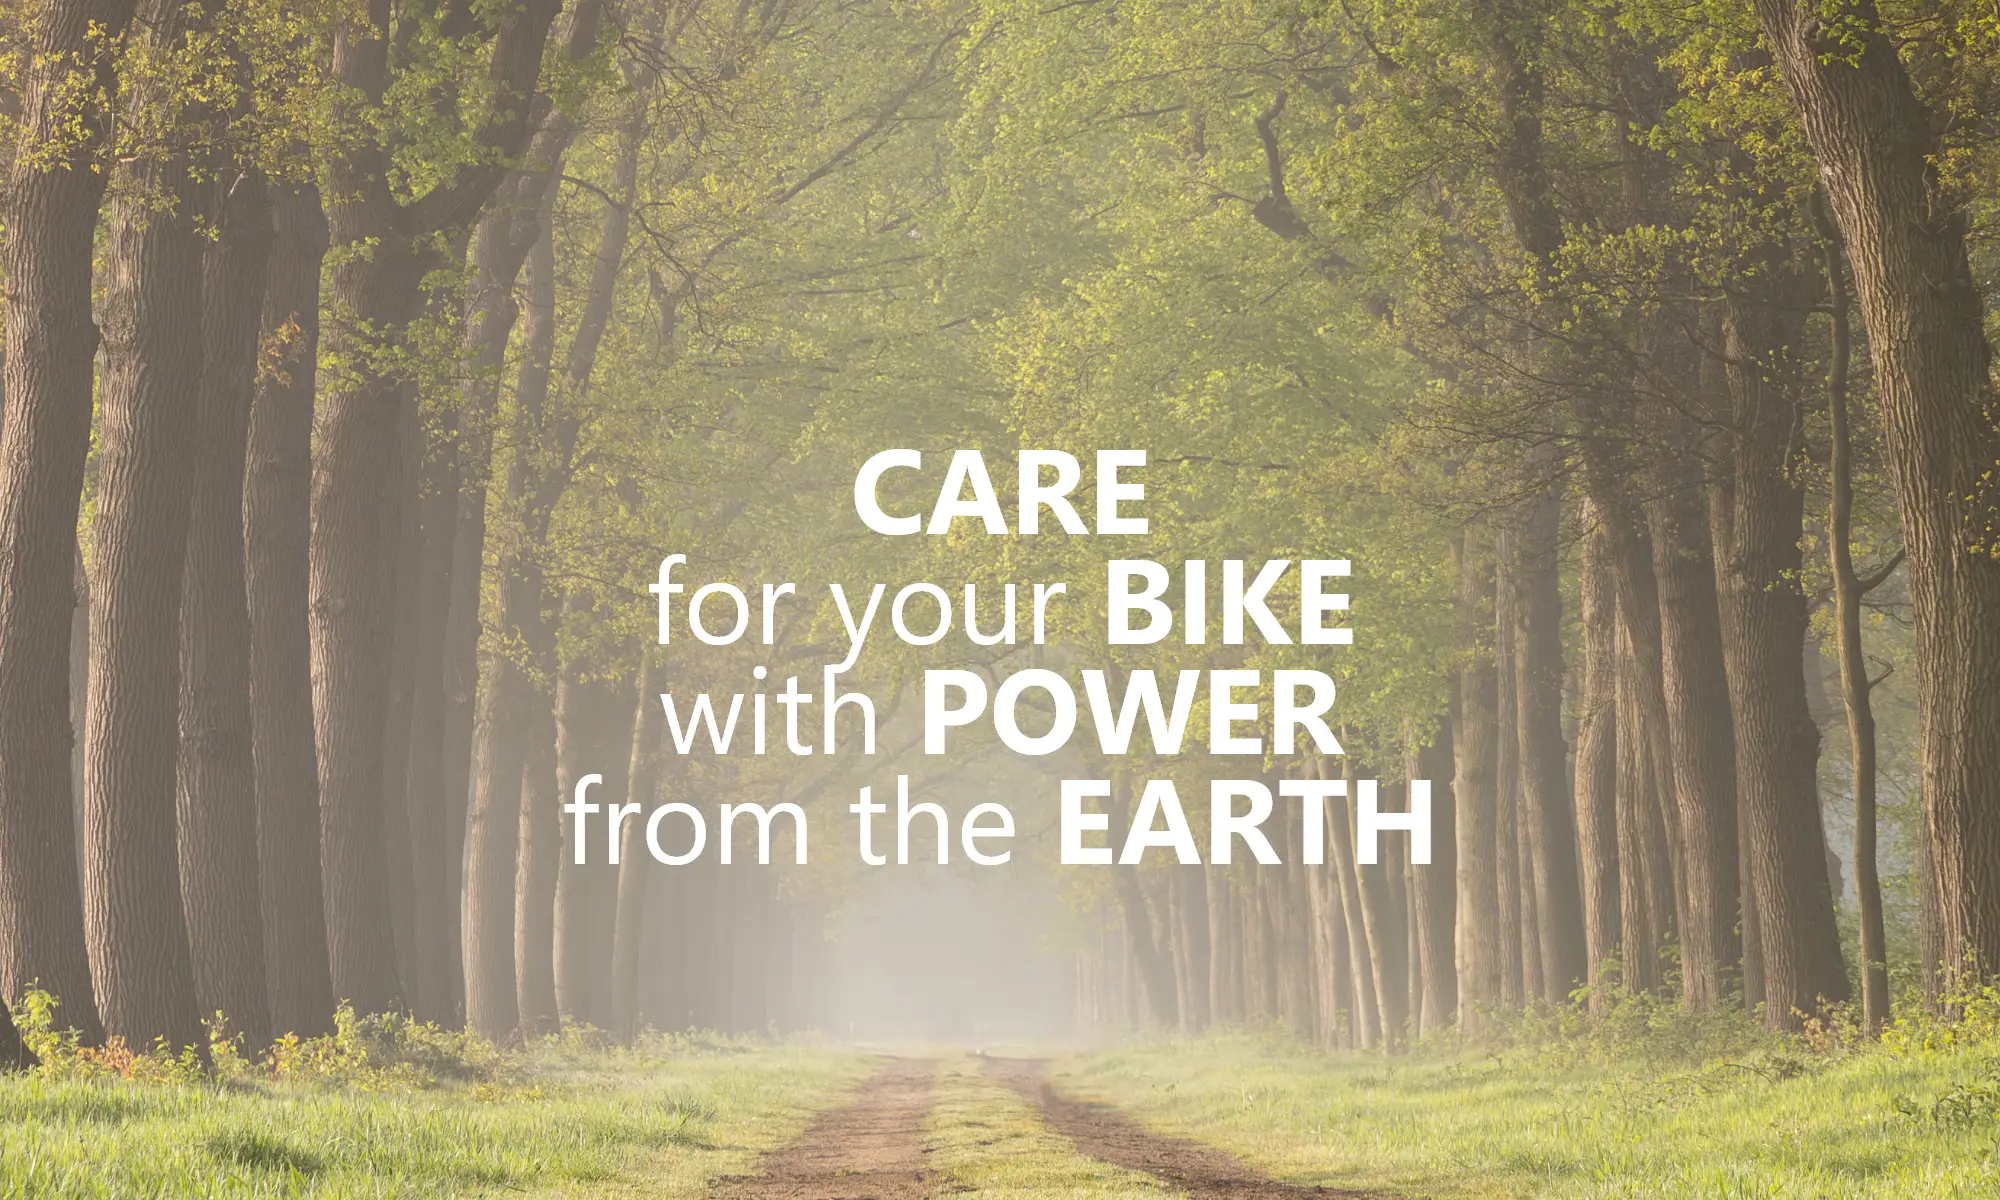 Care for your bike with power from the eath